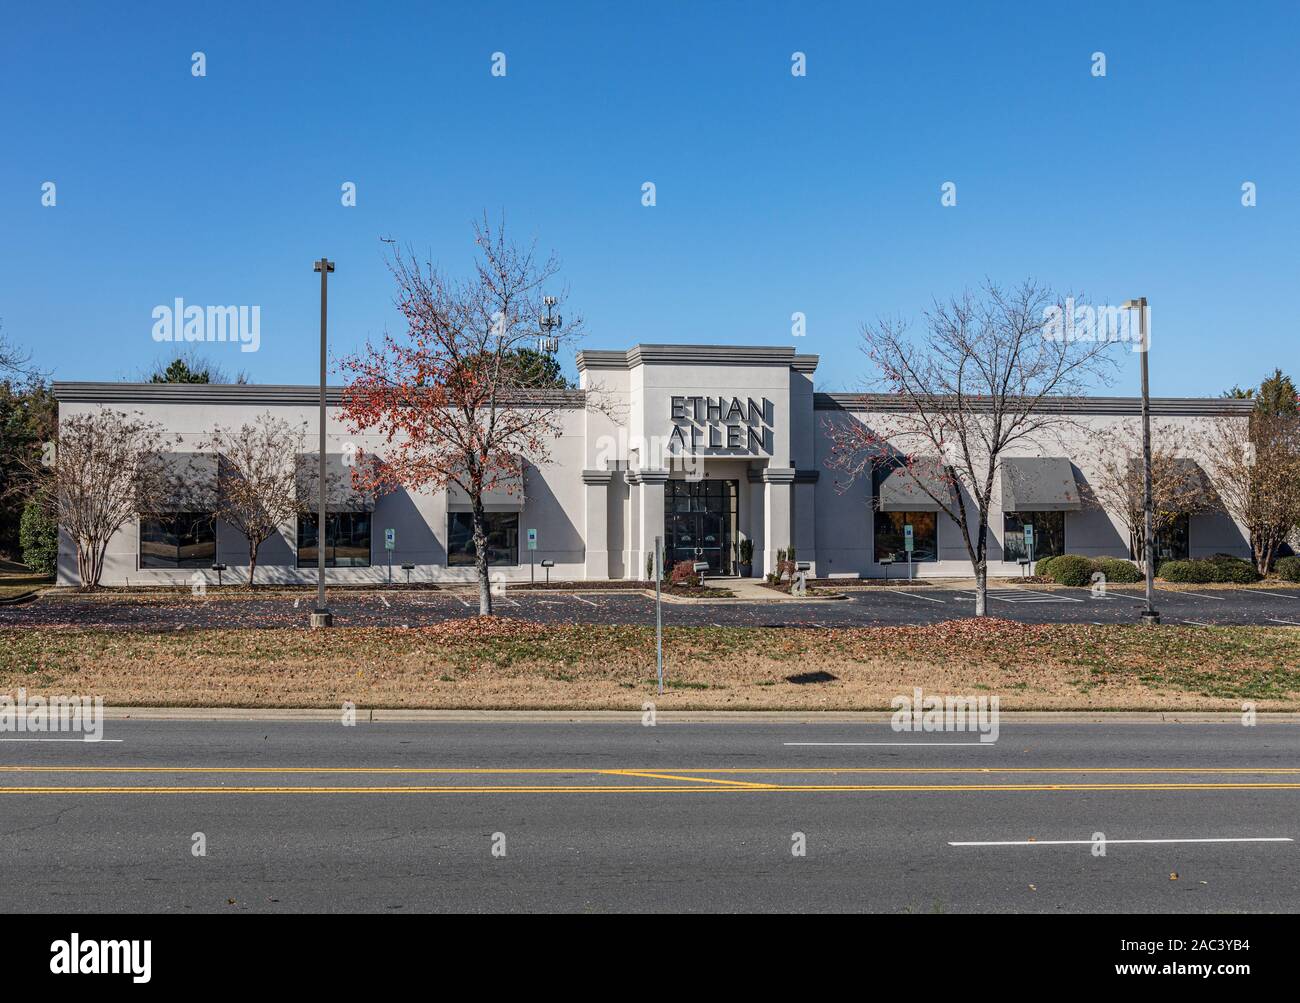 PINEVILLE, NC, USA-24 NOV 2019: An Ethan Allen retail store front, part of an American furniture store chain with more than 300 stores in the US, Cana Stock Photo